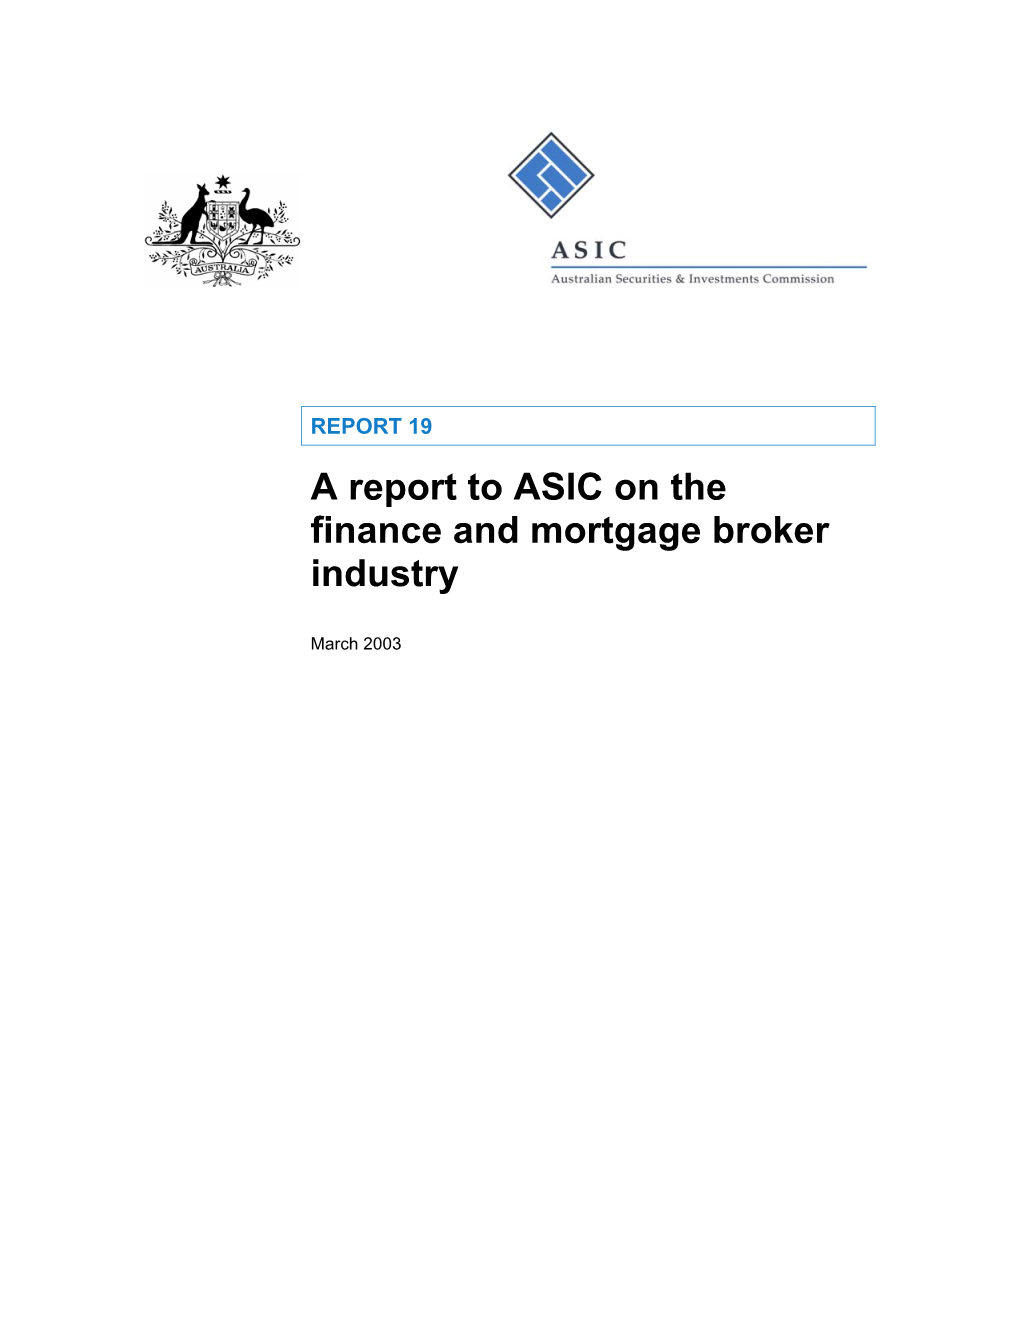 A Report to ASIC on the Finance and Mortgage Broker Industry